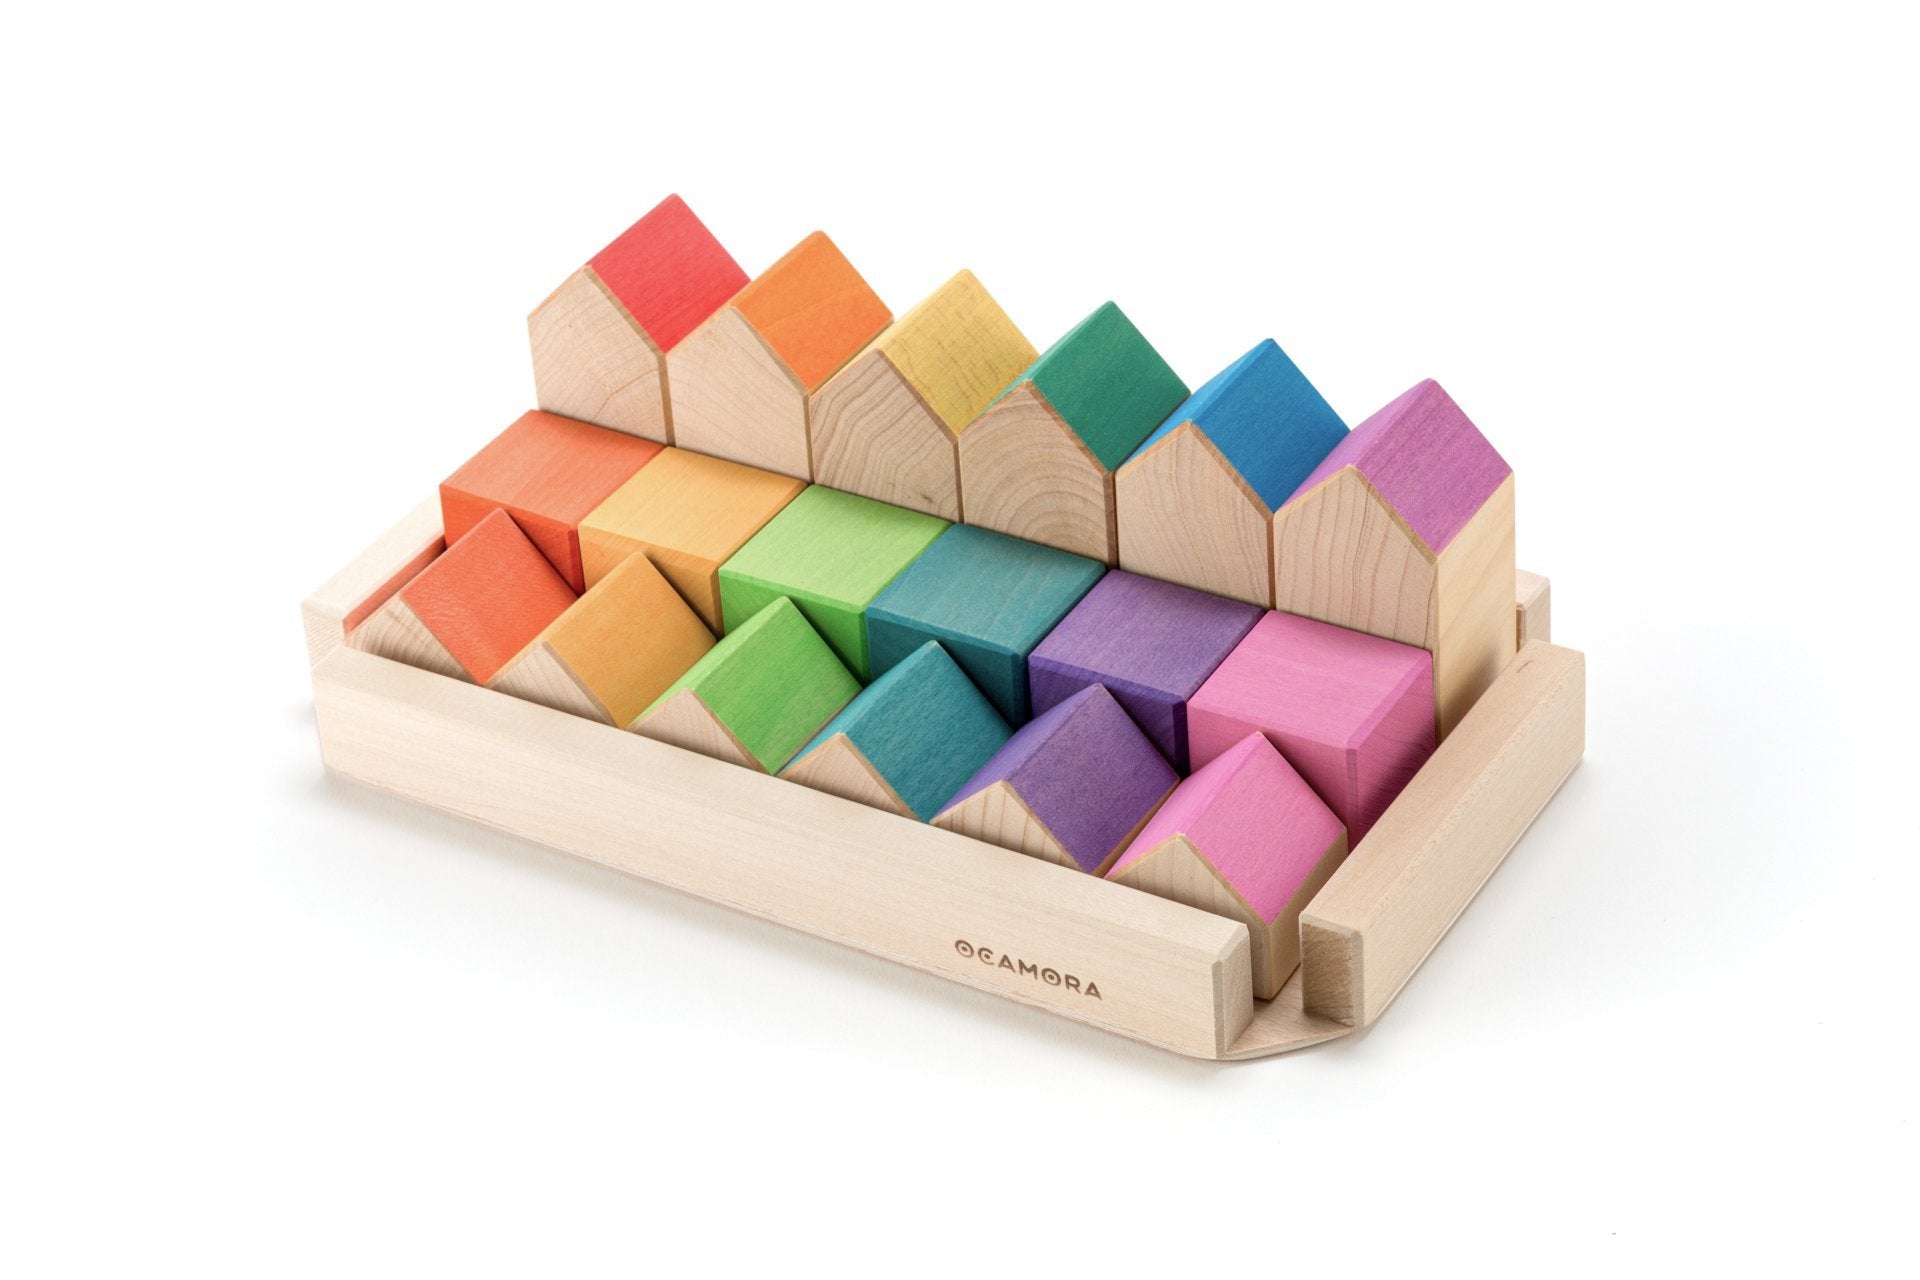 Ocamora Little Houses and Cubes - Natural and Coloured (18 Pieces) - Wood Wood Toys Canada's Favourite Montessori Toy Store